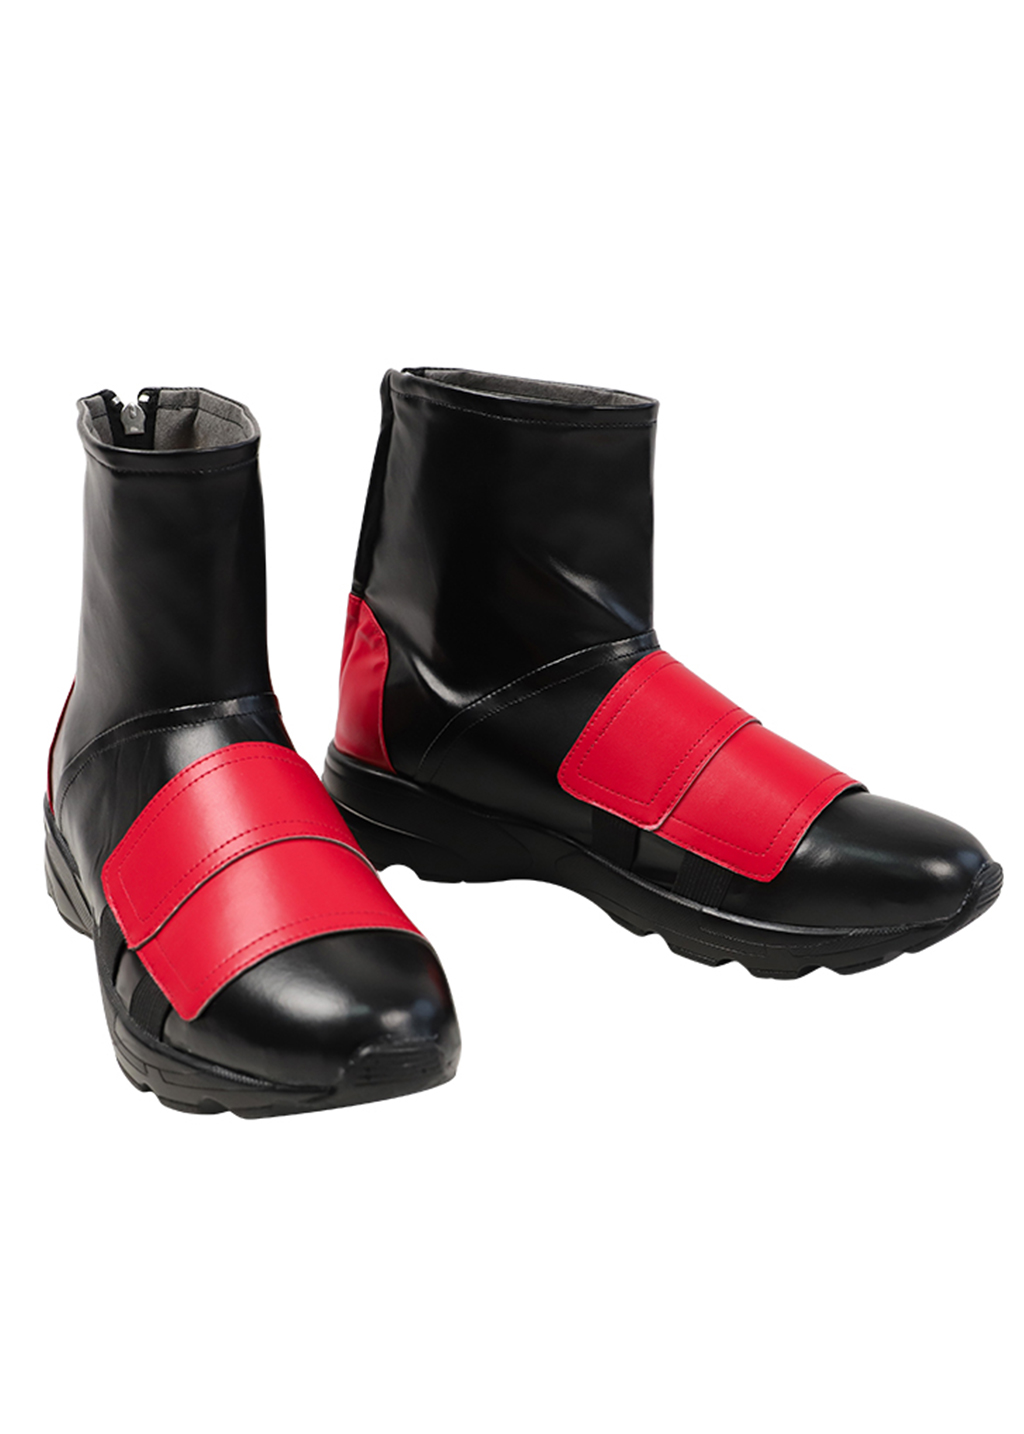 Deadpool and Wolverine Boots Deadpool SAMURAI Shoes Cosplay Ver.1